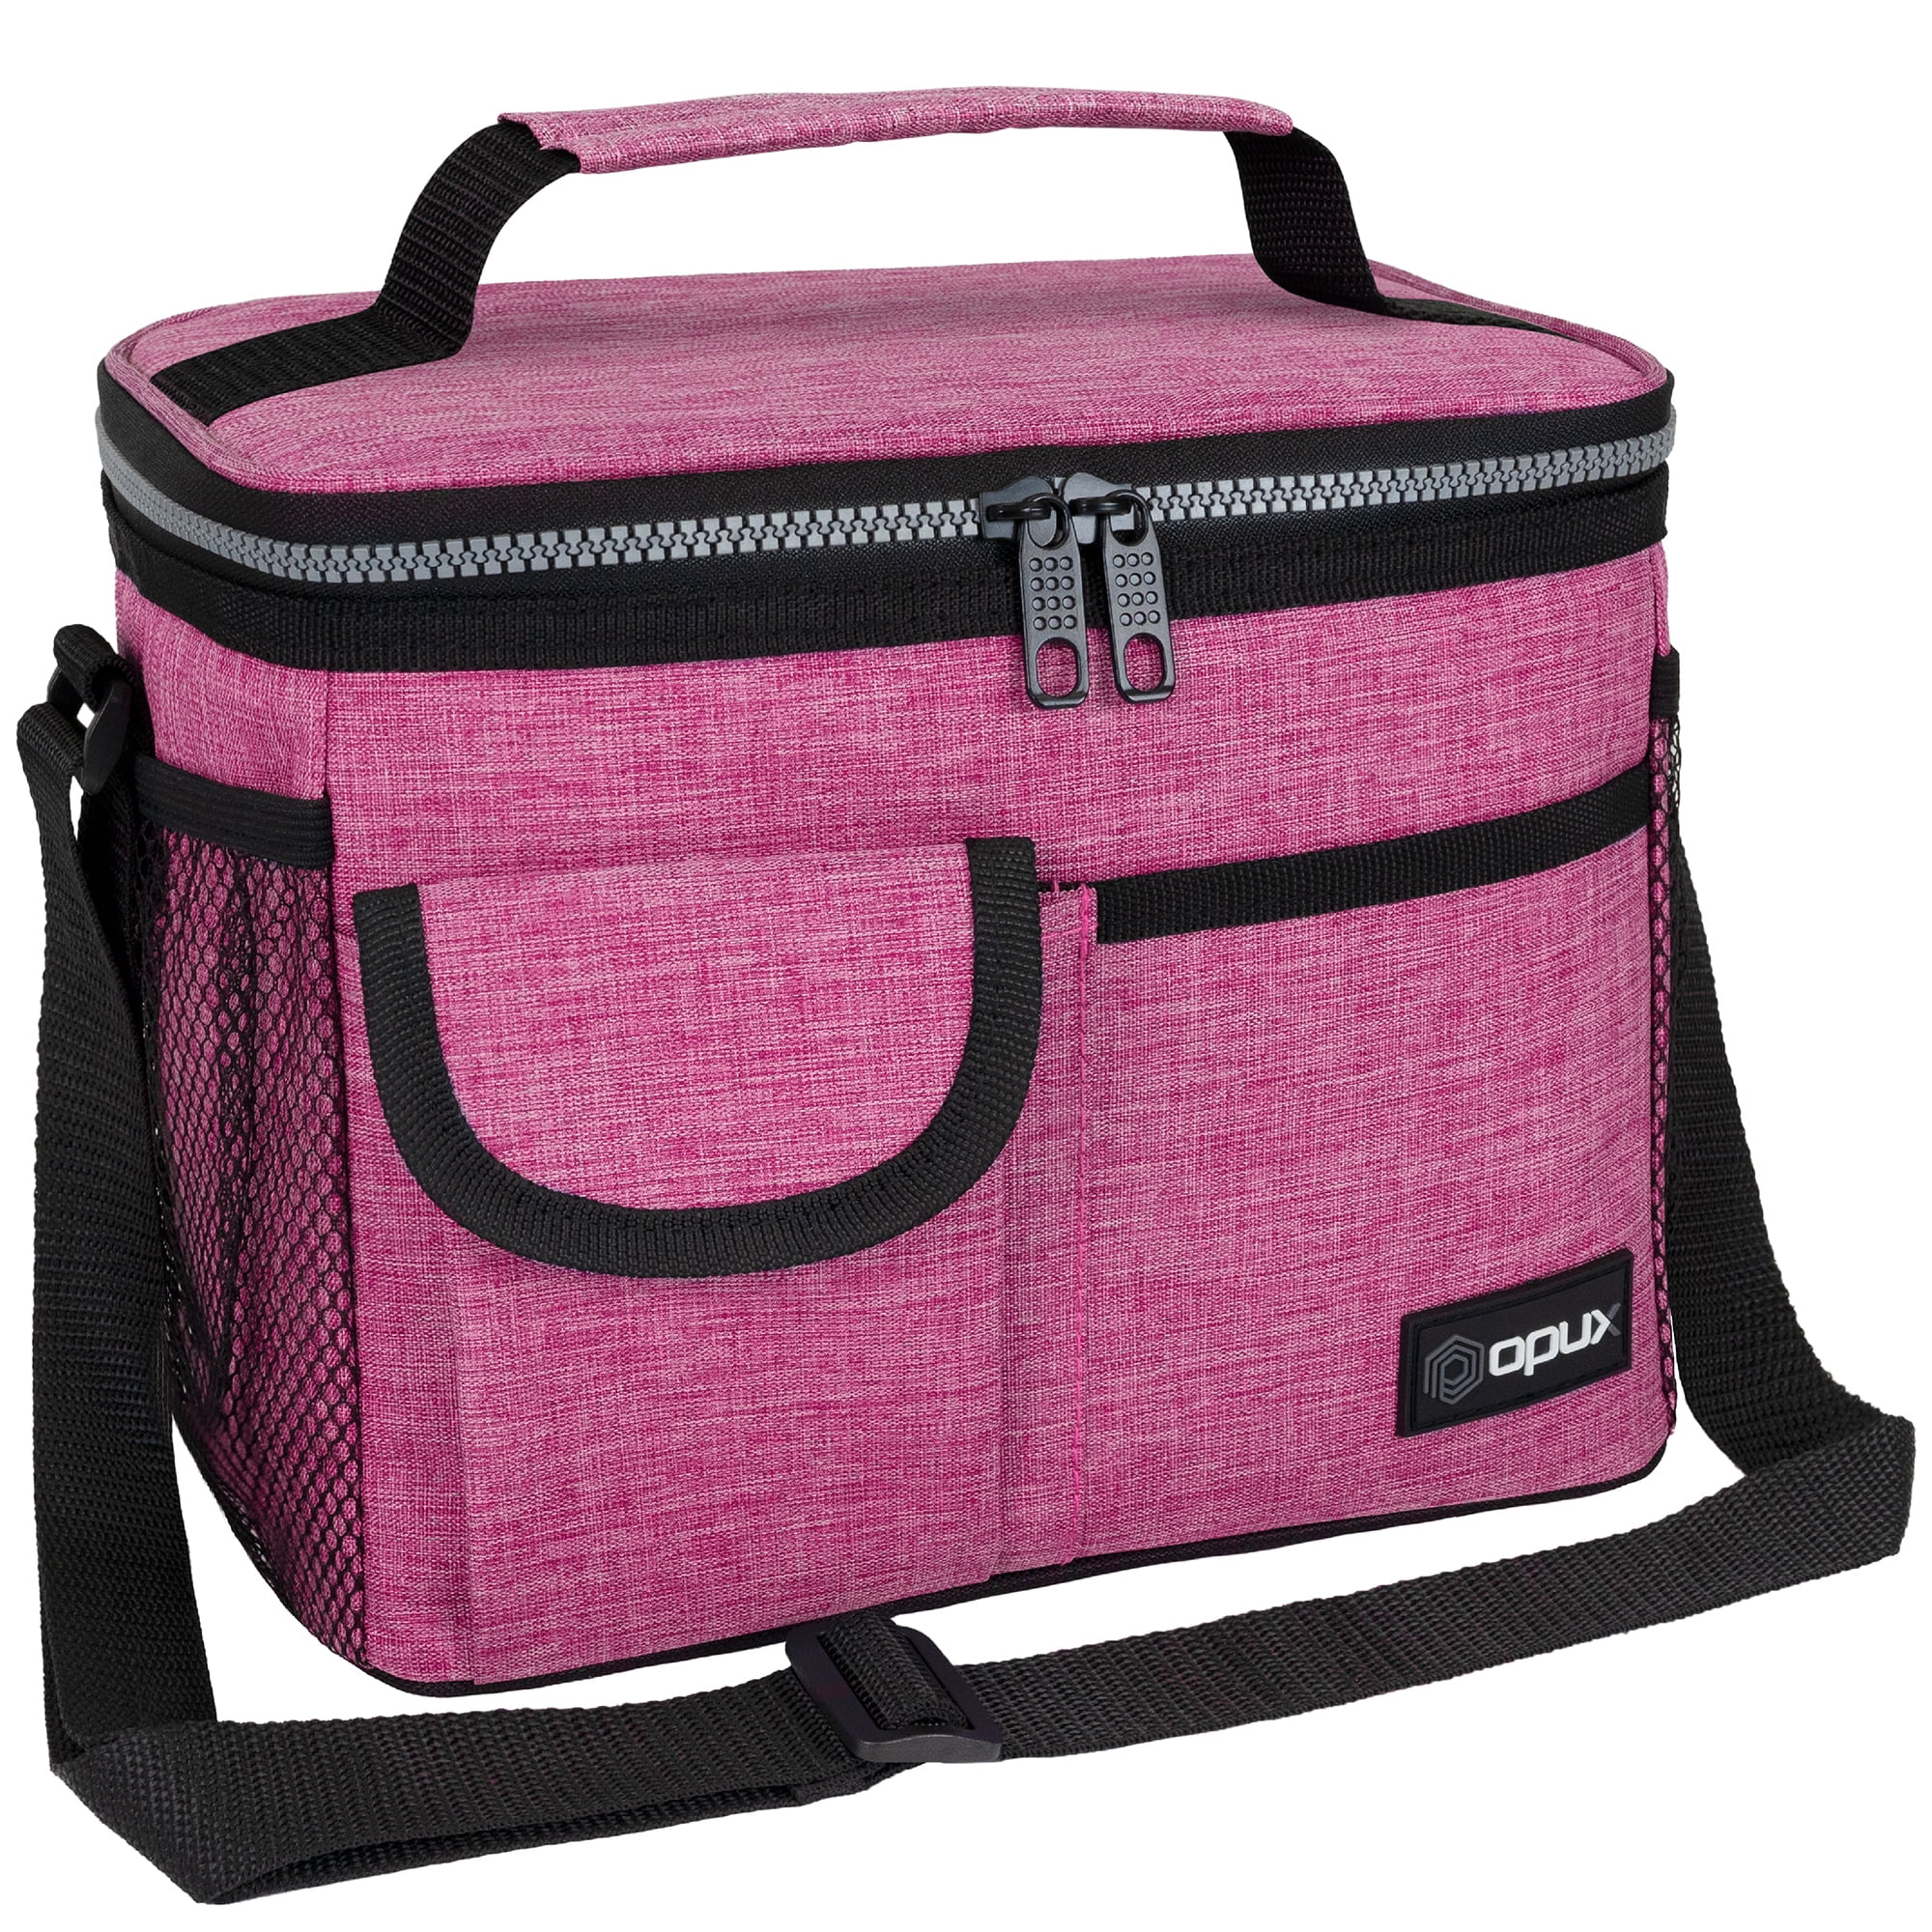 Chihuahua Insulated Pink School Lunch Box Bag AD-CH1LBP 